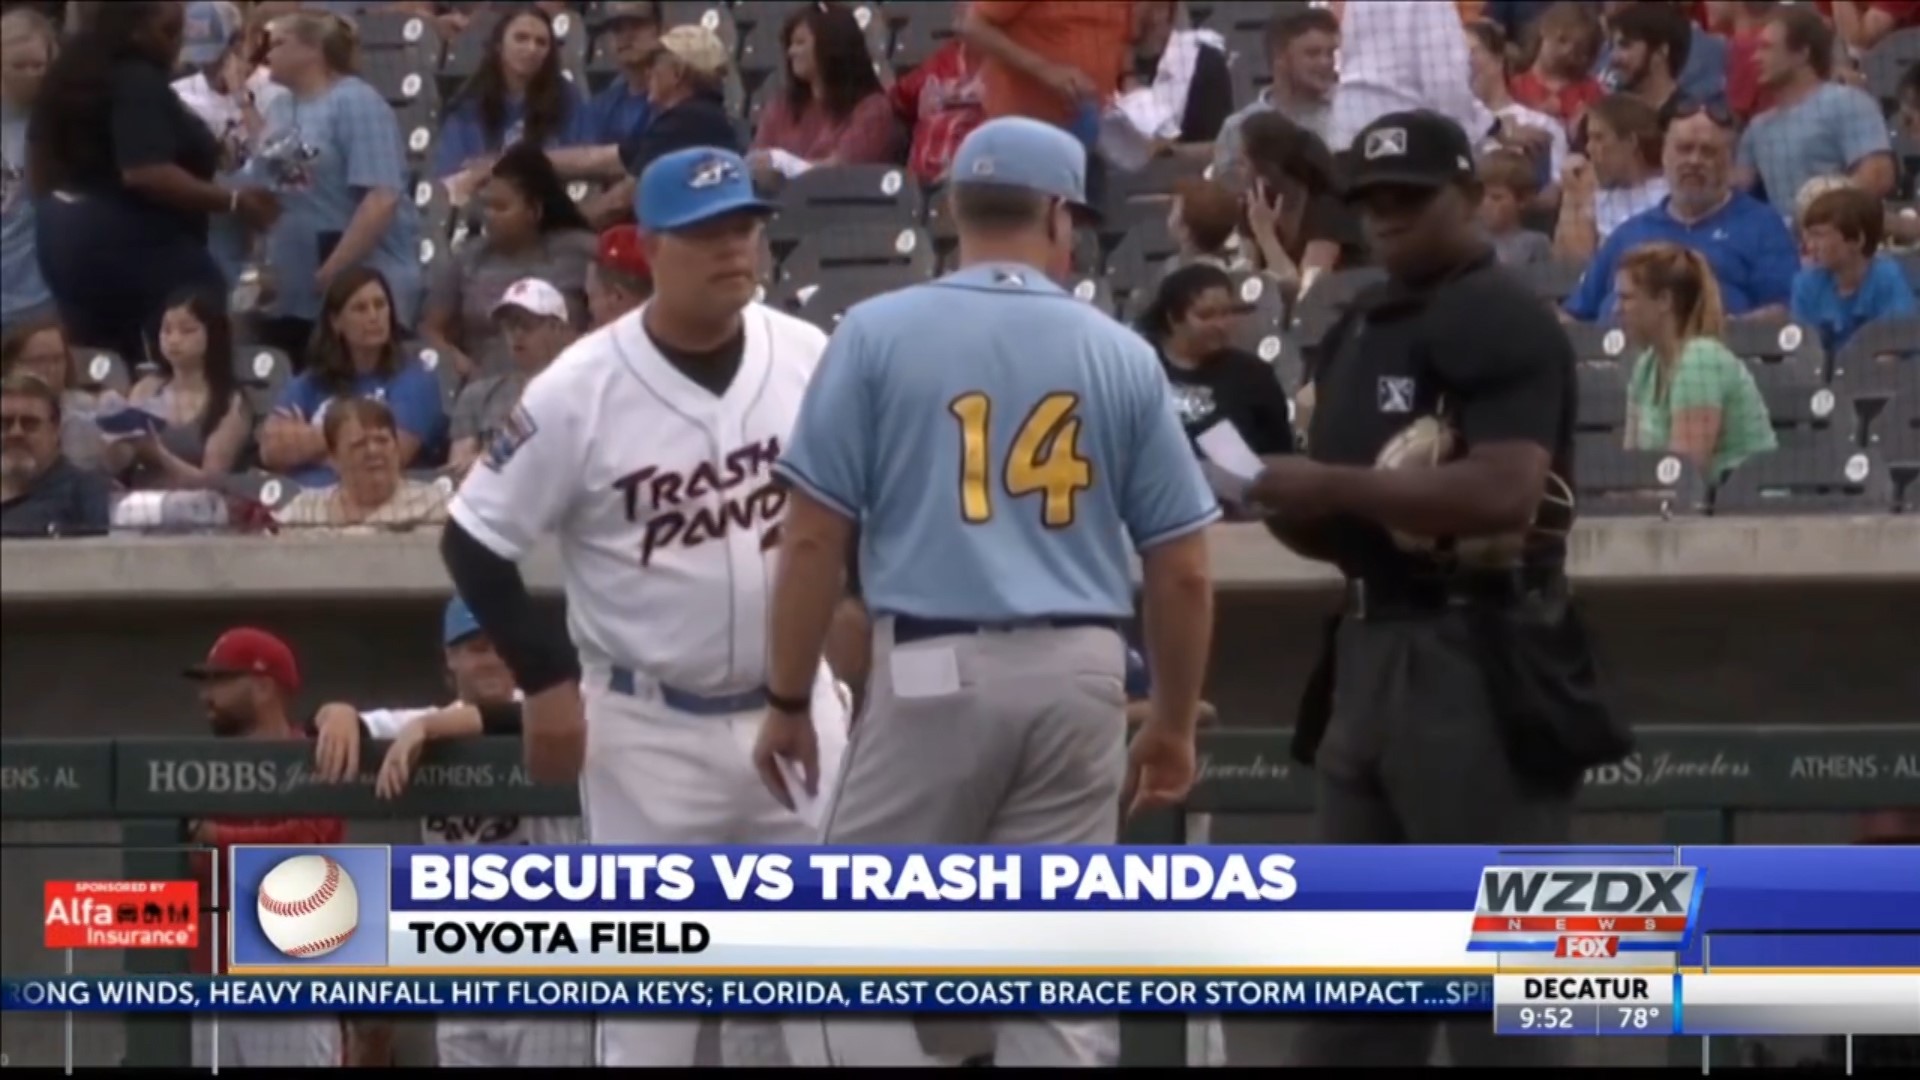 The Rocket City Trash Pandas surrendered 5 runs to in the top of the 9th inning in an 8-6 loss to the Montgomery Biscuits.